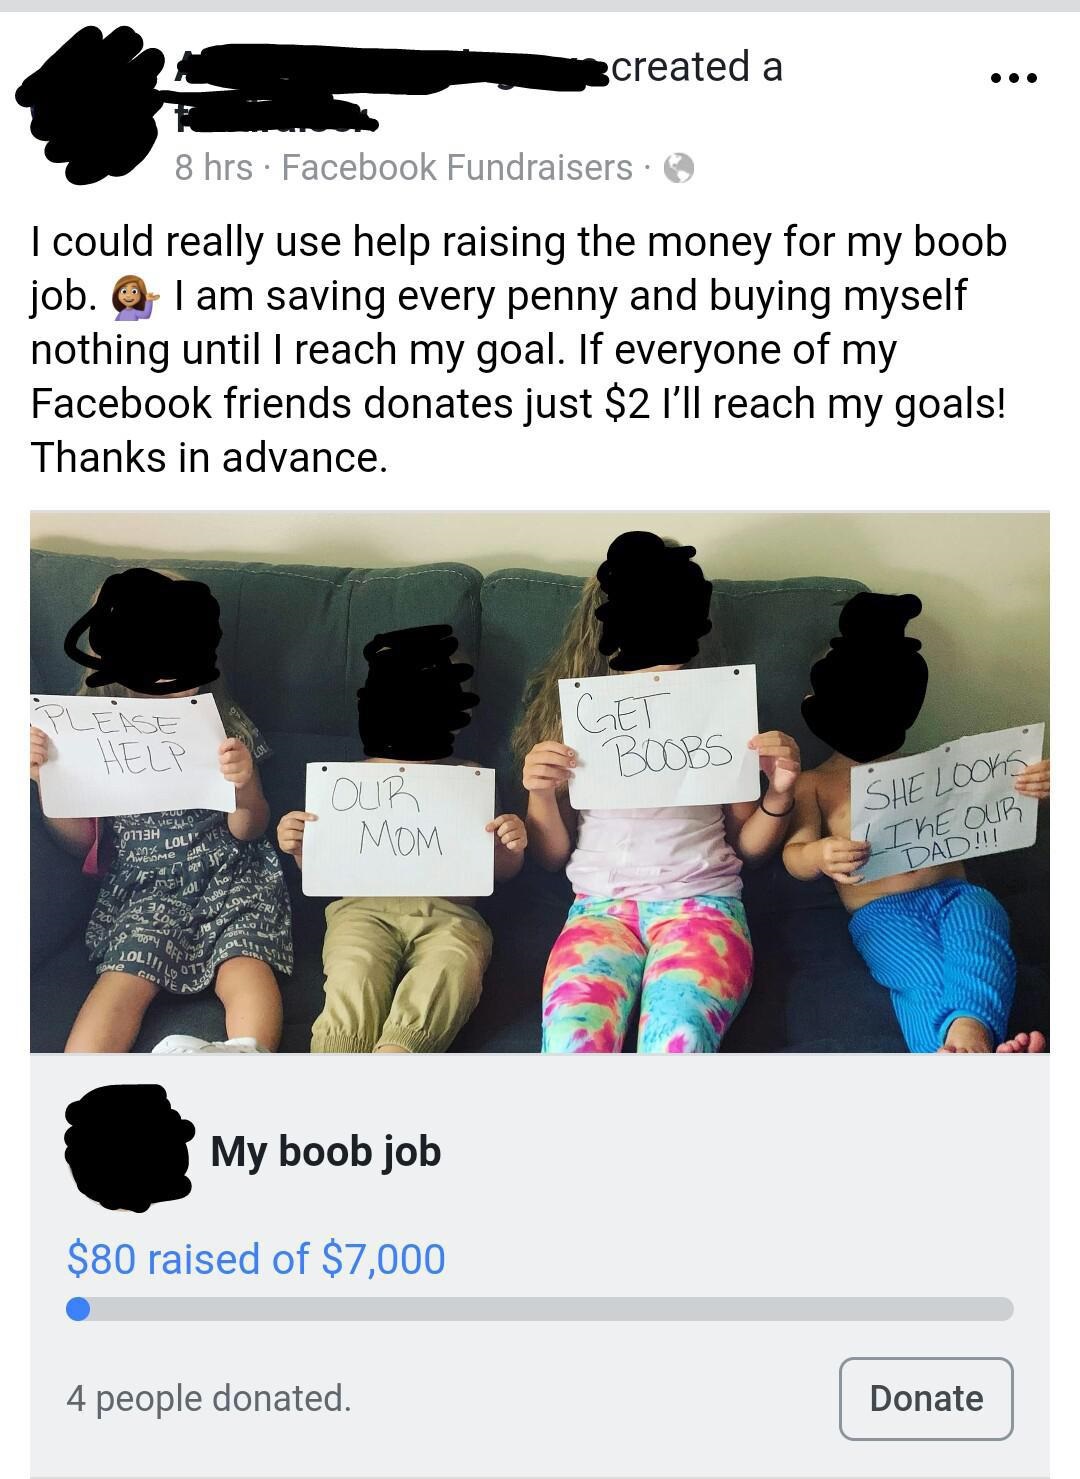 insane parents facebook - 3created a 8 hrs Facebook Fundraisers I could really use help raising the money for my boob job. I am saving every penny and buying myself nothing until I reach my goal. If everyone of my Facebook friends donates just $2 I'll rea